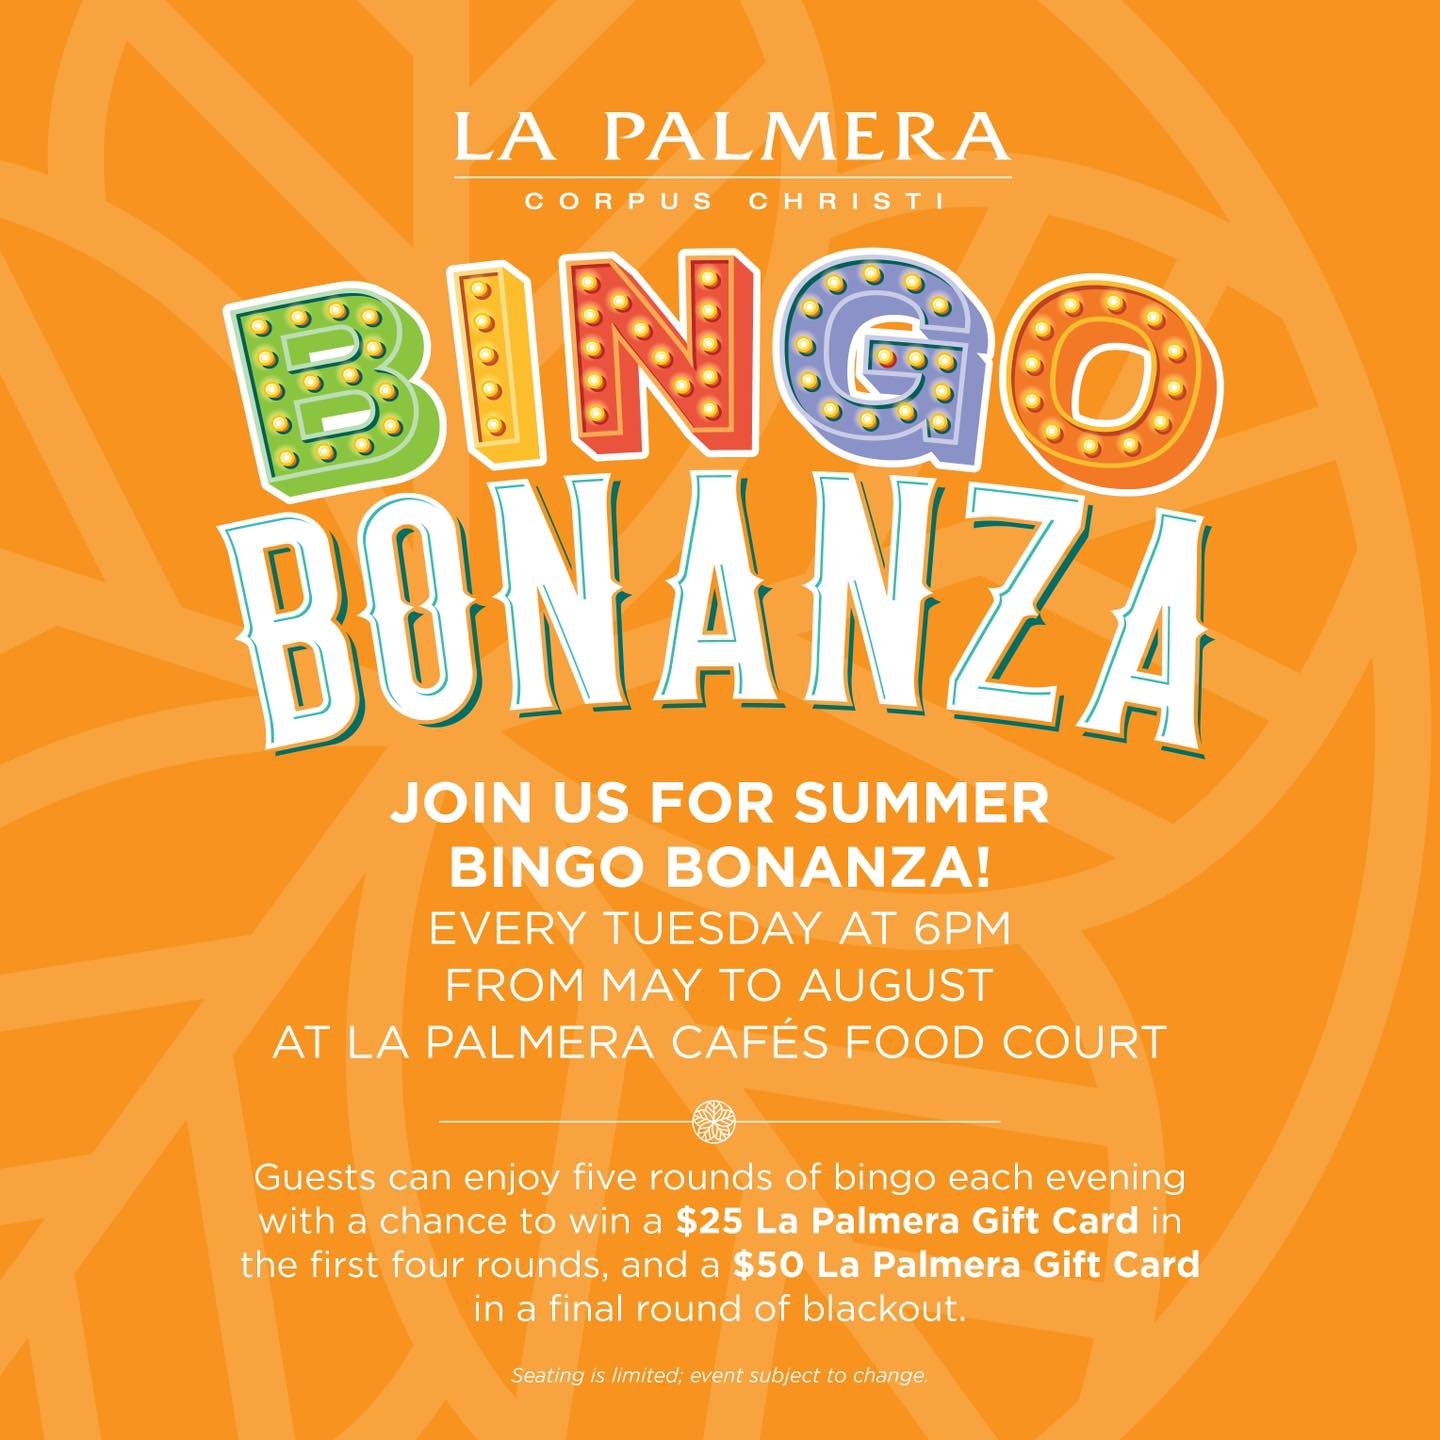 Bingo Bonanza is back! Join us every Tuesday, starting May 14 for FREE bingo in La Palmera Cafes Food Court for a chance to win La Palmera gift cards.